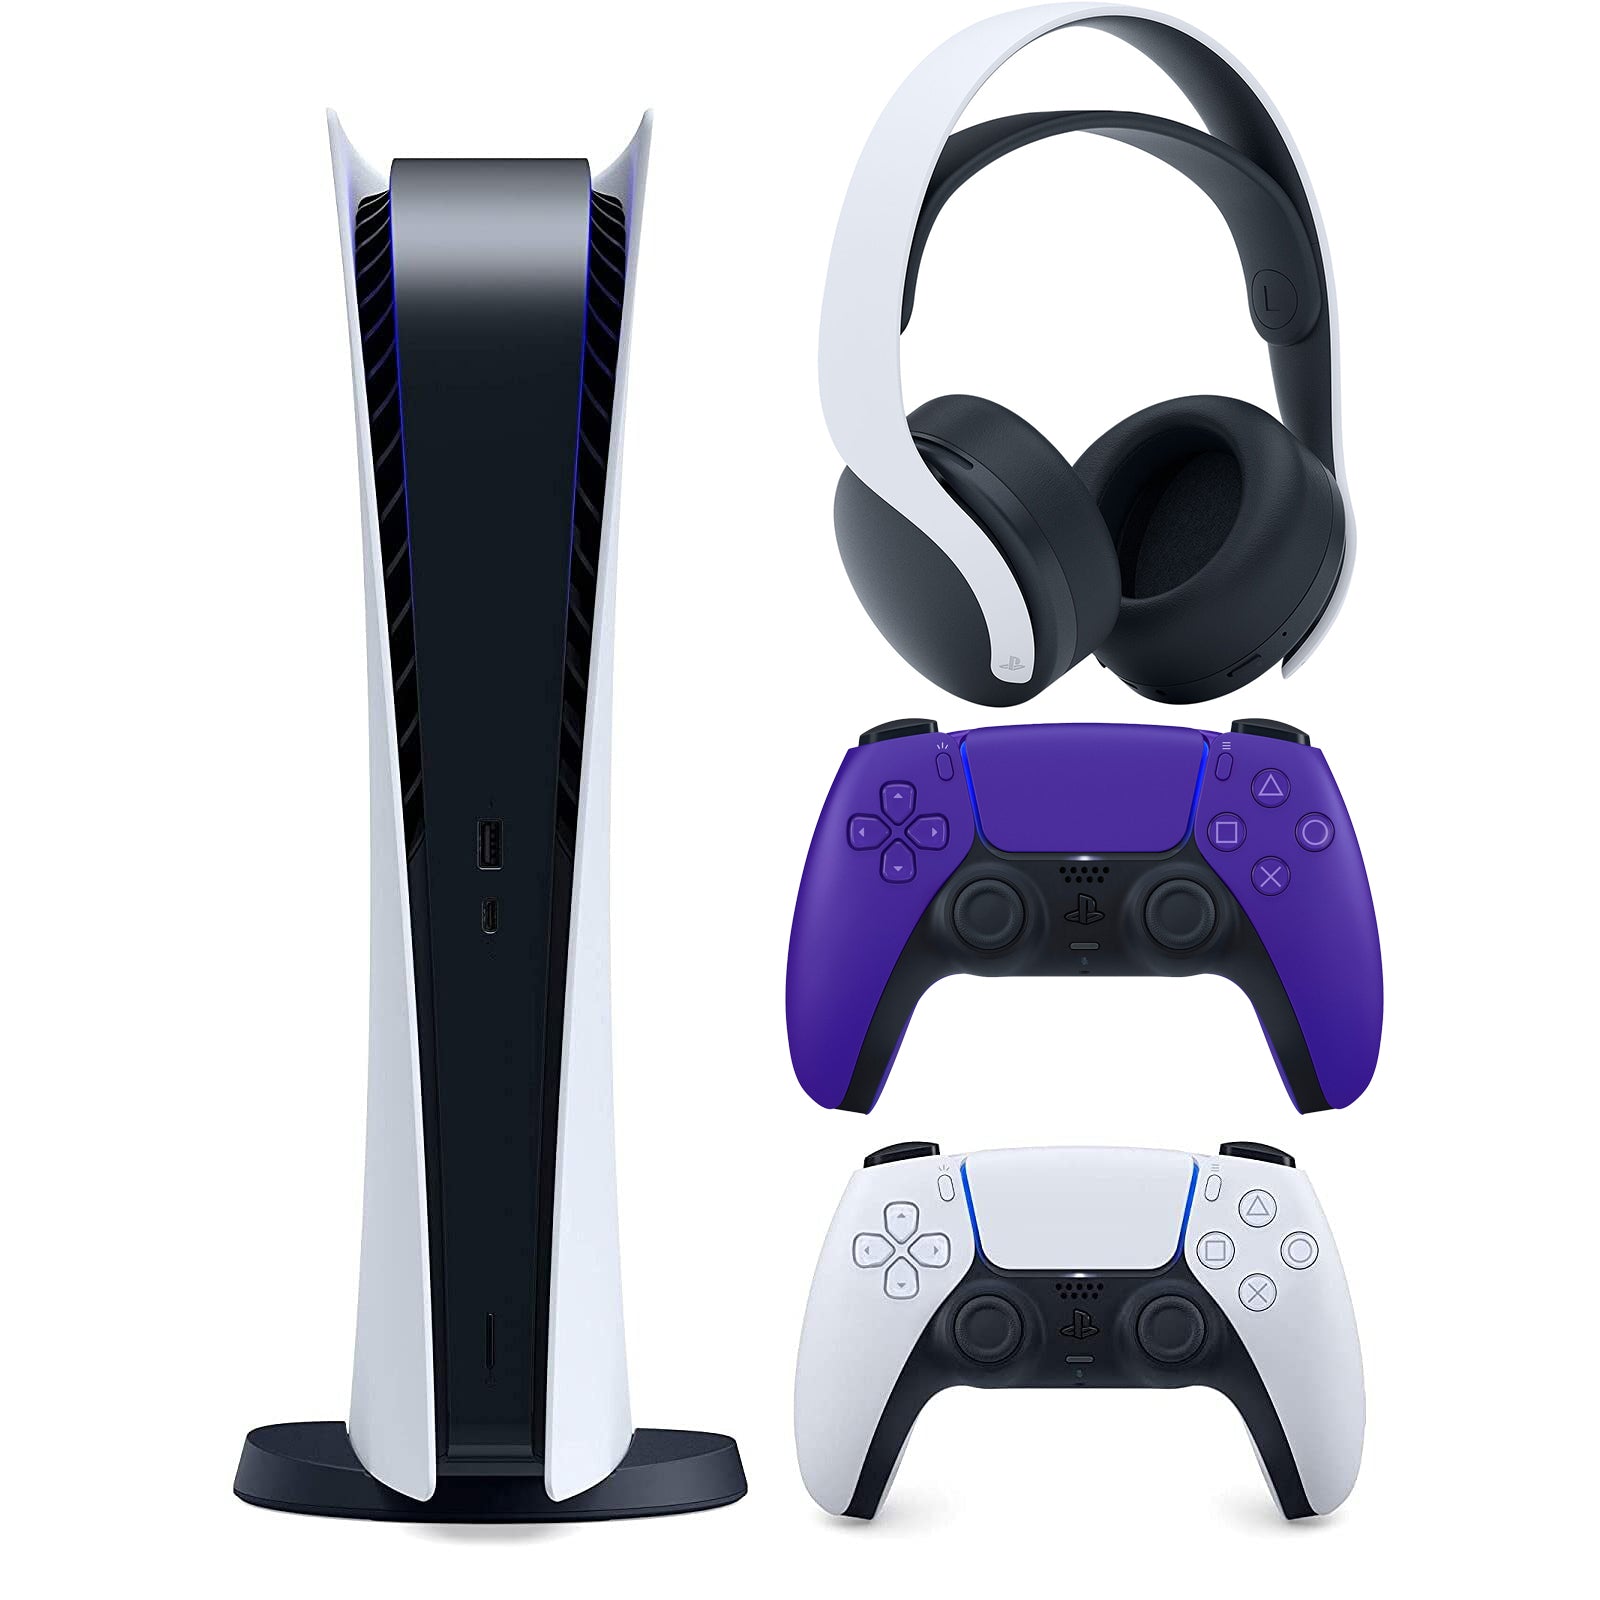 Sony Playstation 5 Digital Version (Sony PS5 Digital) with Extra Galactic Purple Controller and White PULSE 3D Headset Bundle - Pro-Distributing